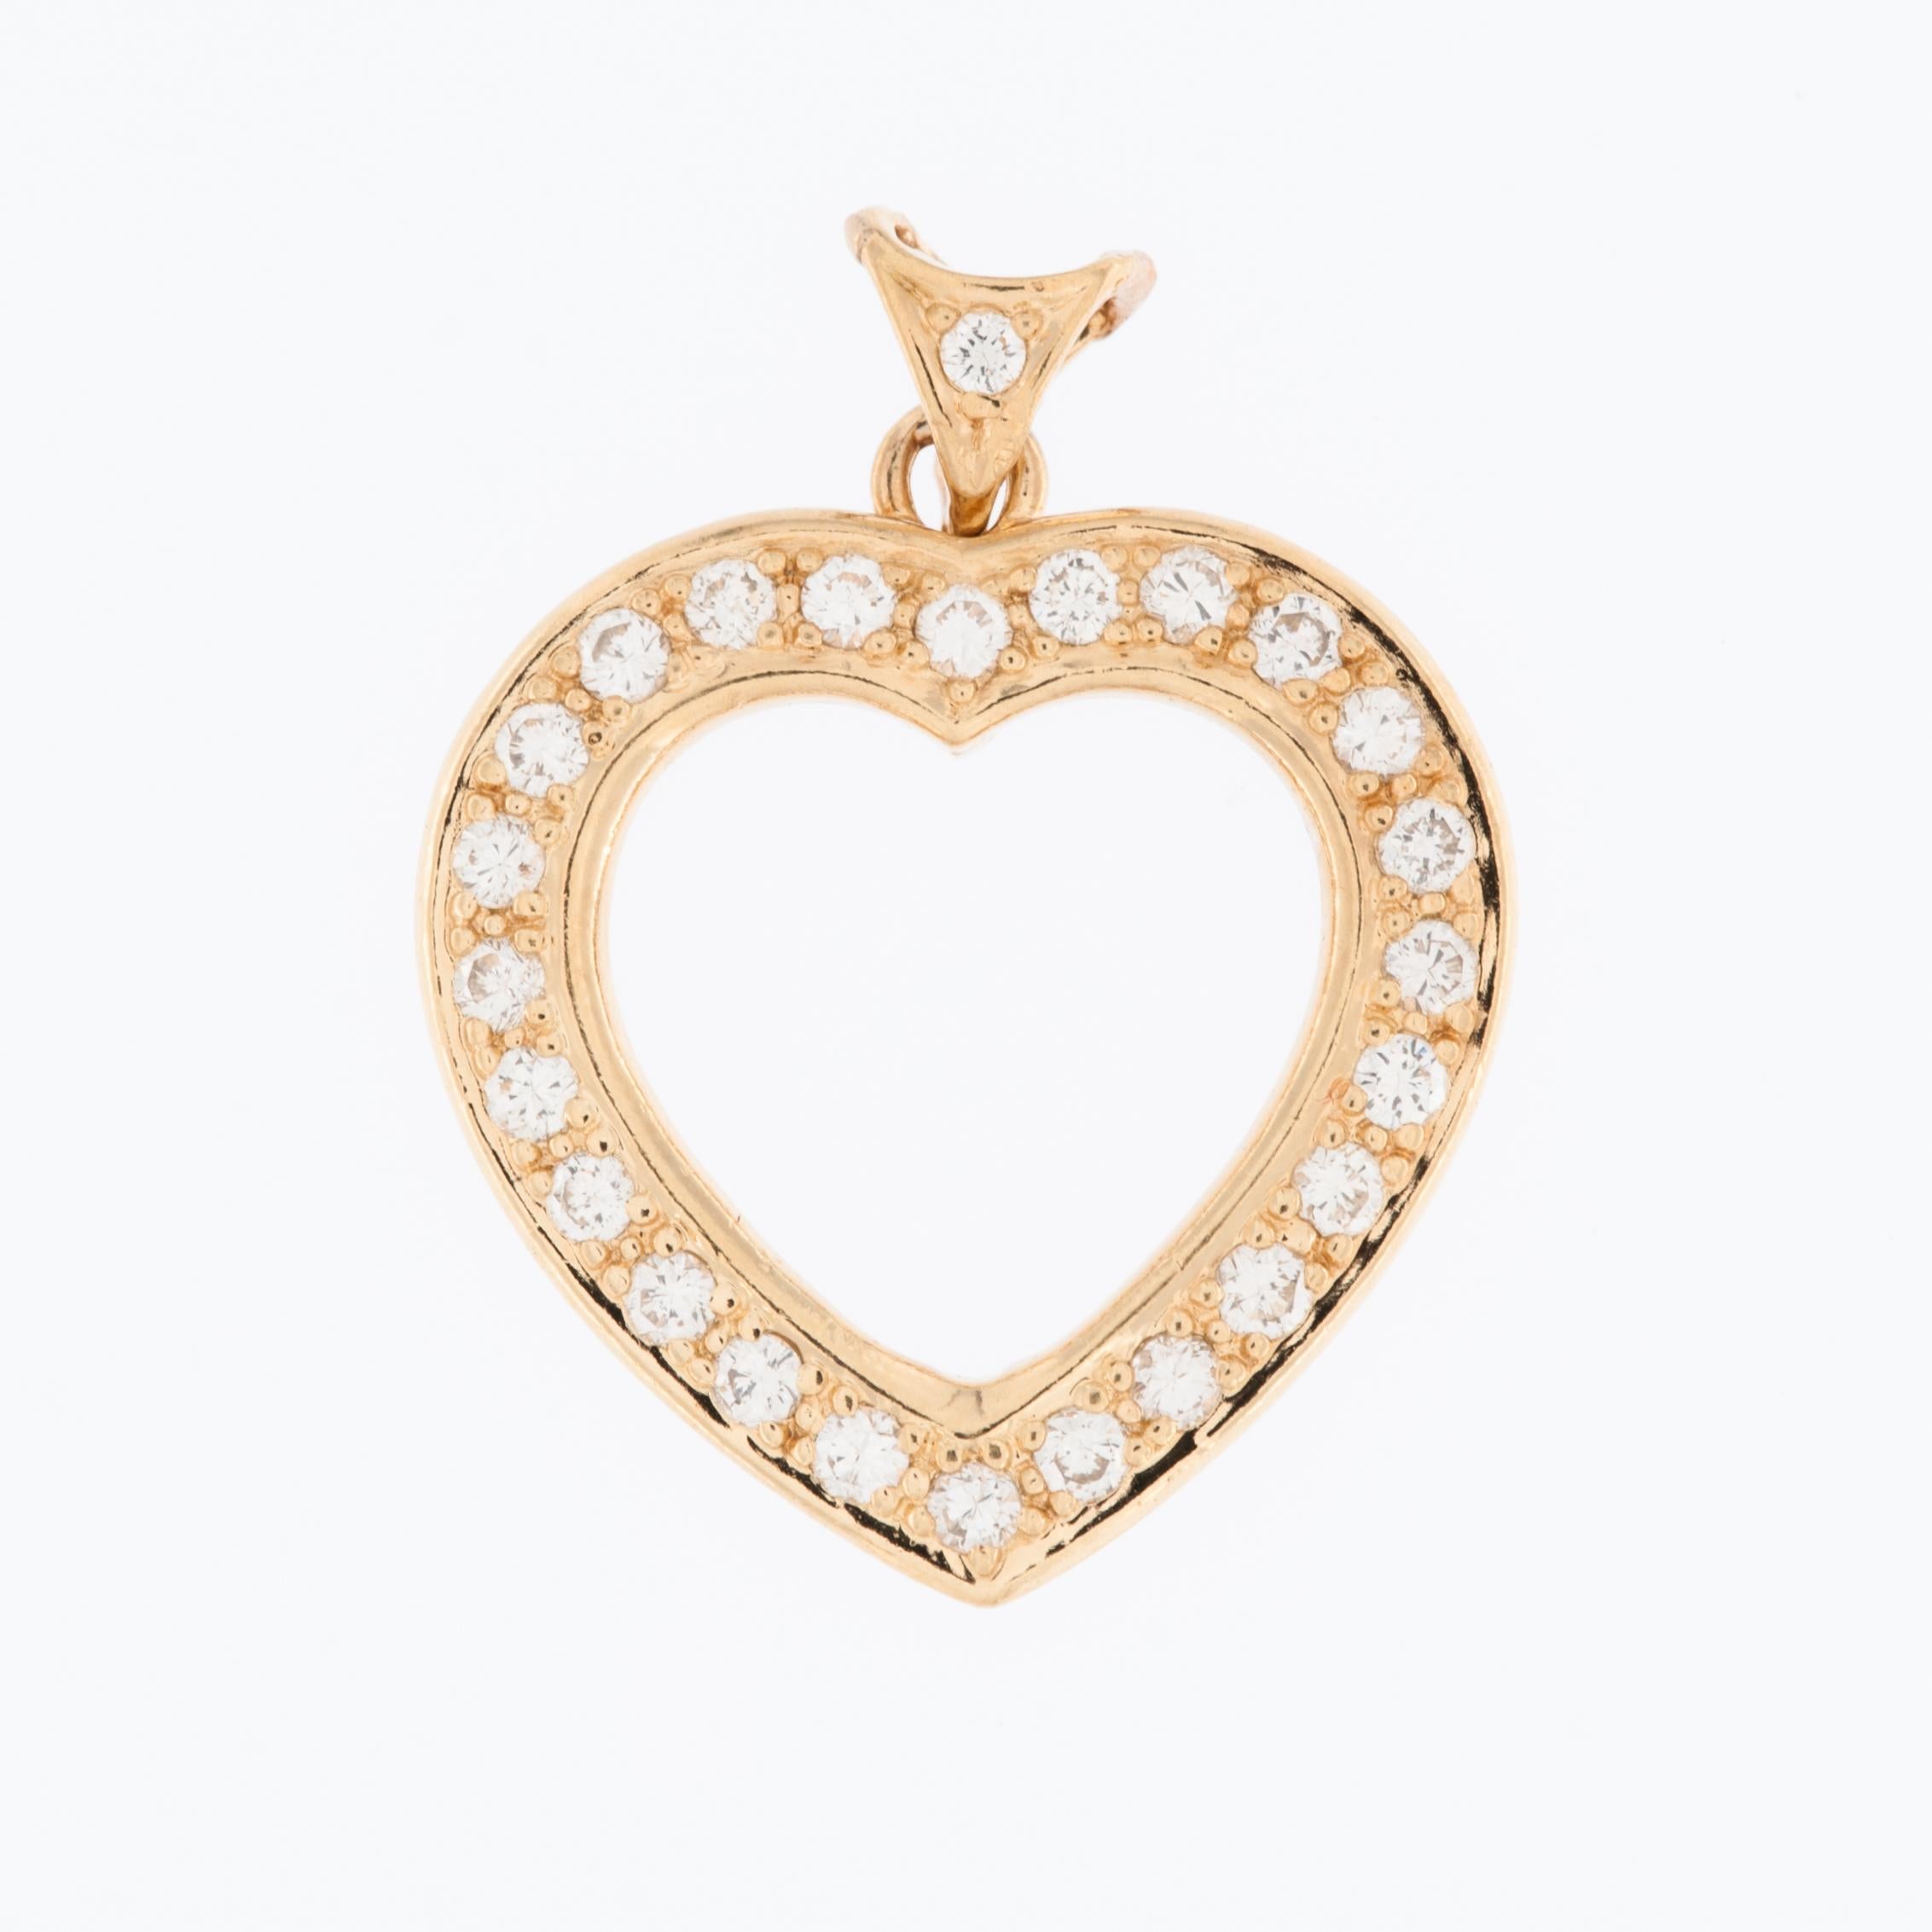 The Vintage Diamonds Heart Pendant in 18kt Yellow Gold exudes timeless elegance and romantic charm. Crafted with meticulous attention to detail, this exquisite pendant showcases a classic heart-shaped design that transcends trends and epitomizes